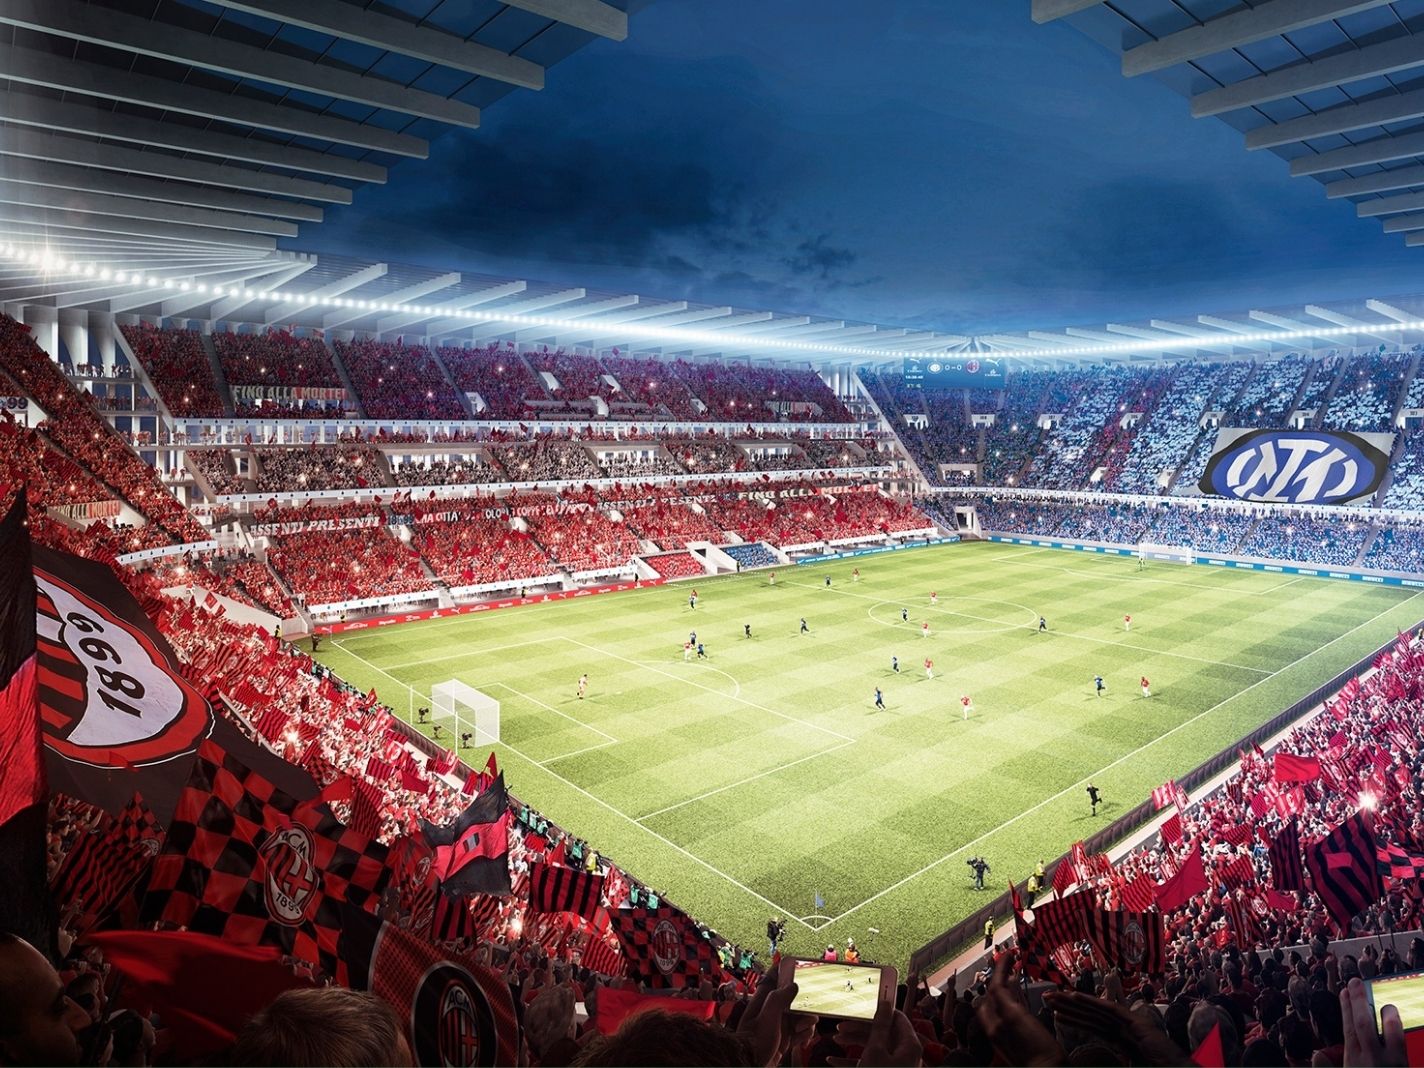 Inter and AC Milan reveal plans for new 65k capacity stadium